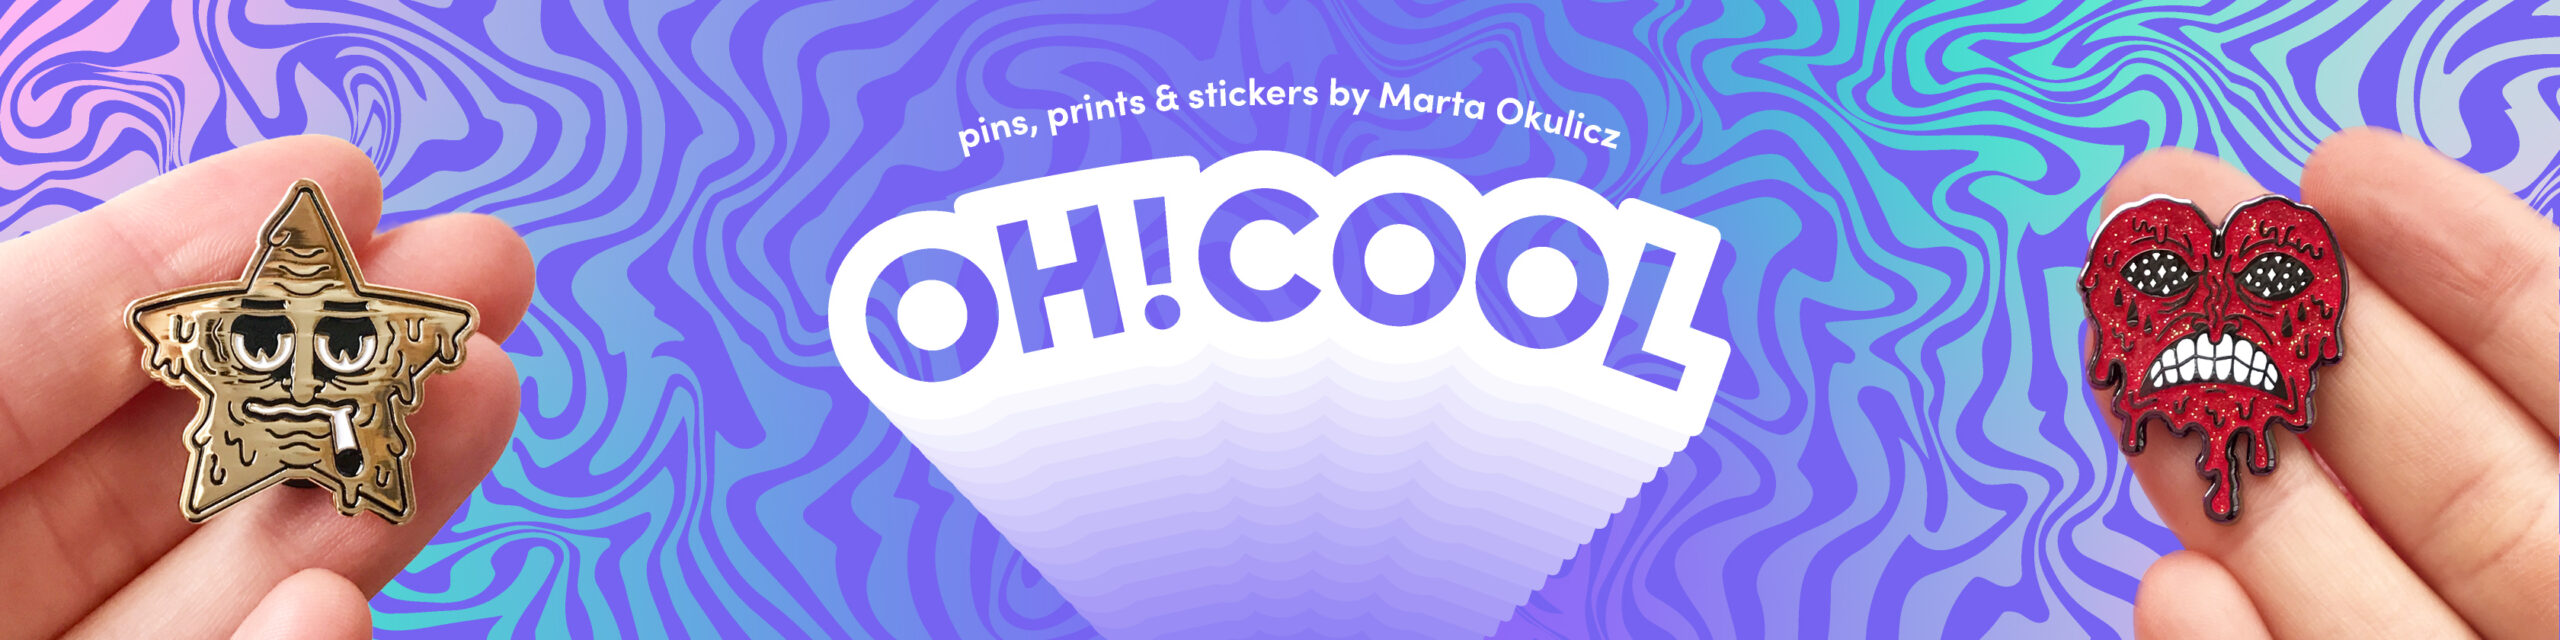 ohcool-etsy-cover-04